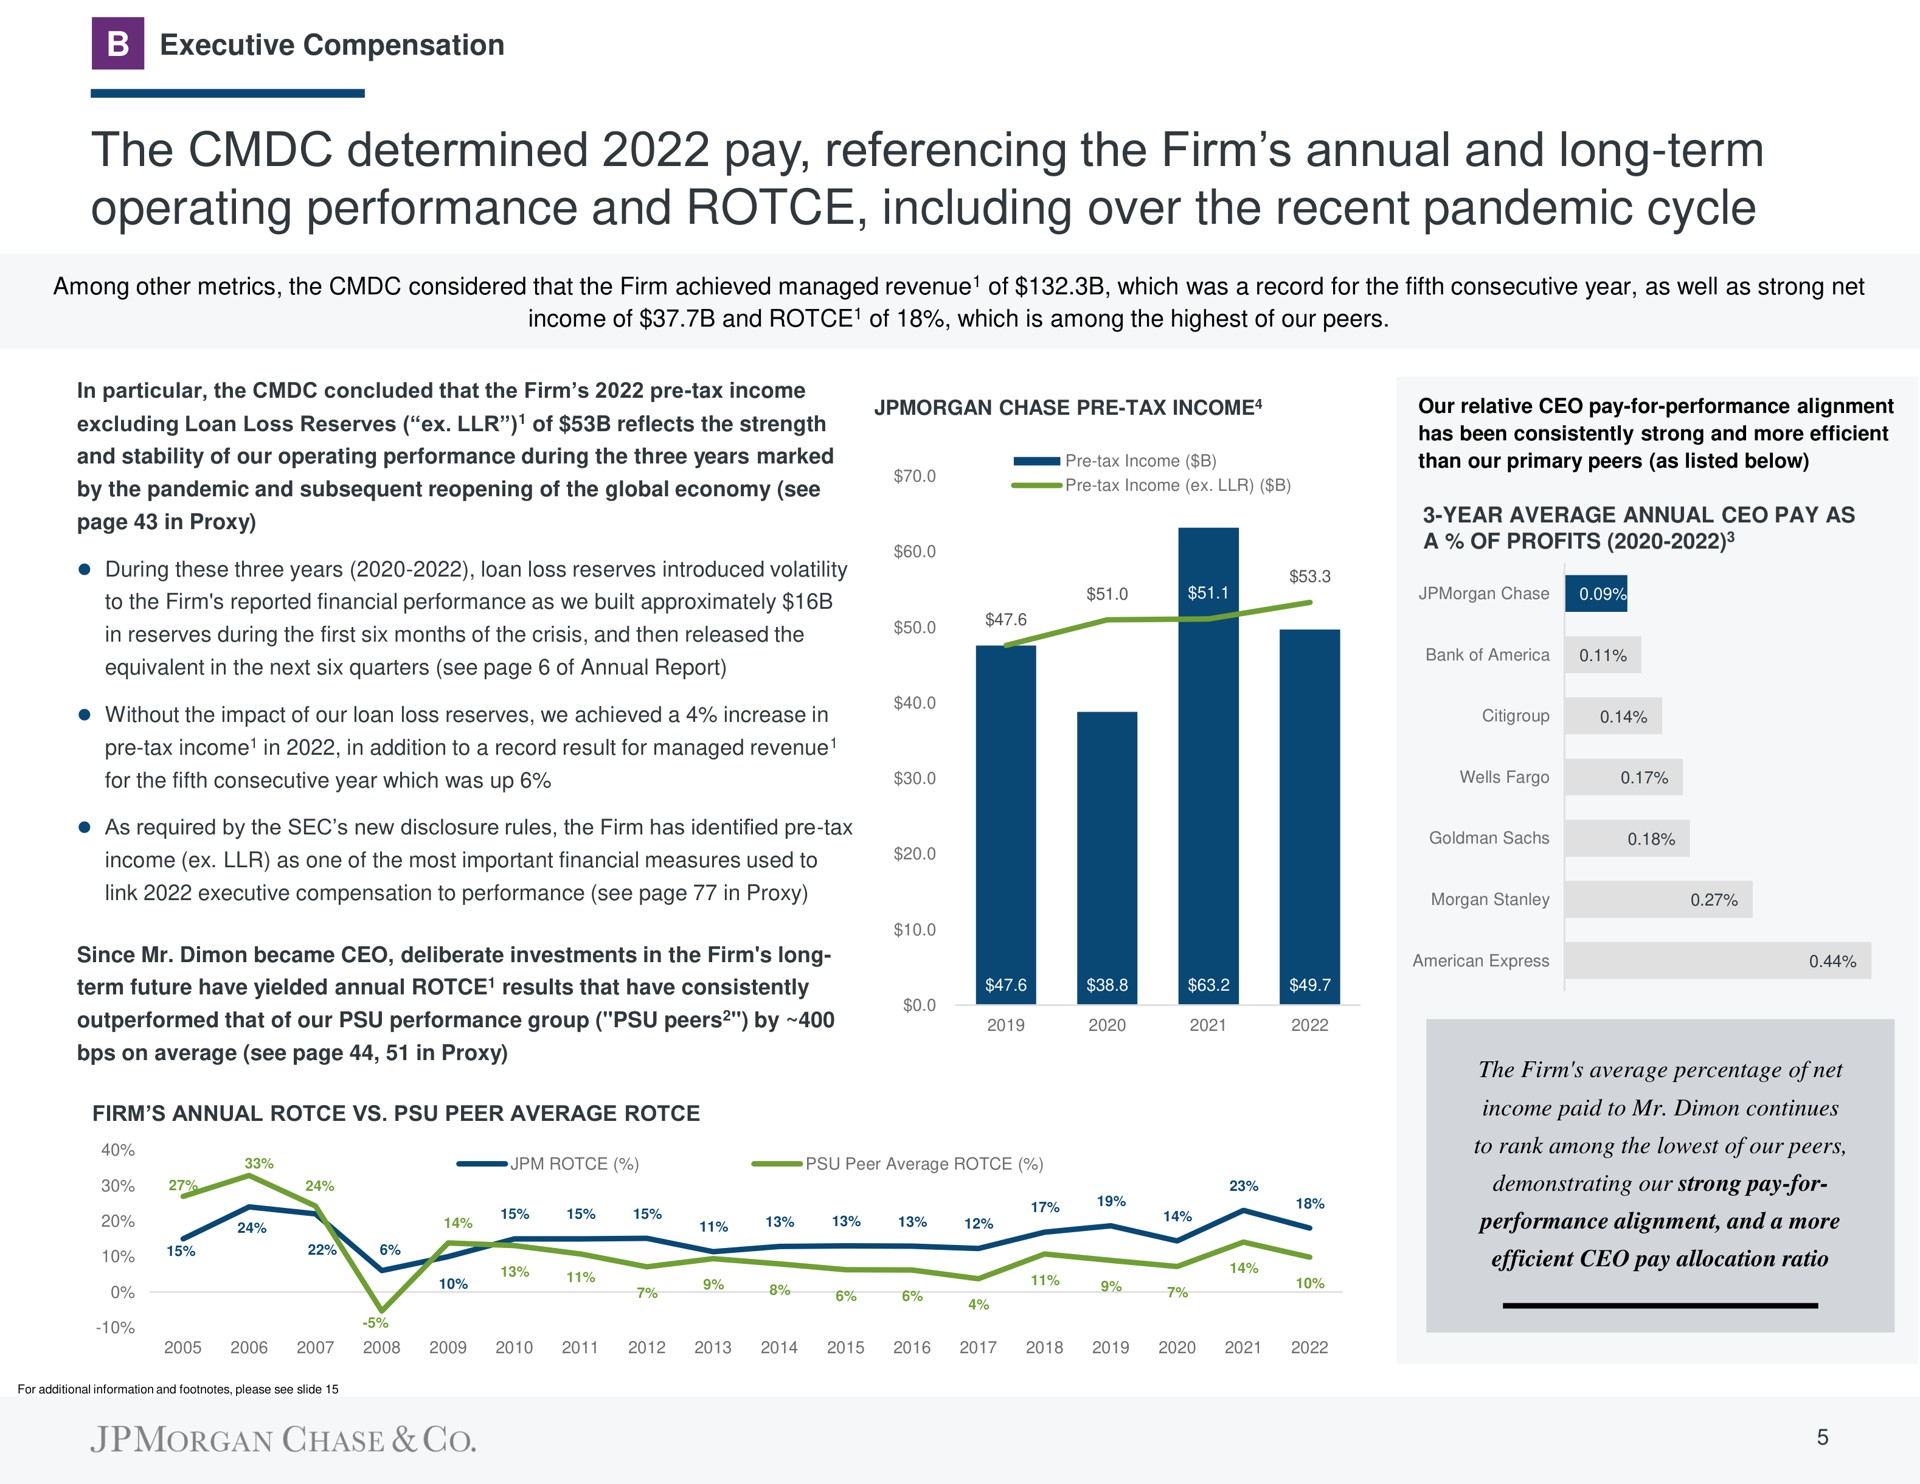 the determined pay referencing the firm annual and long term operating performance and including over the recent pandemic cycle | J.P.Morgan